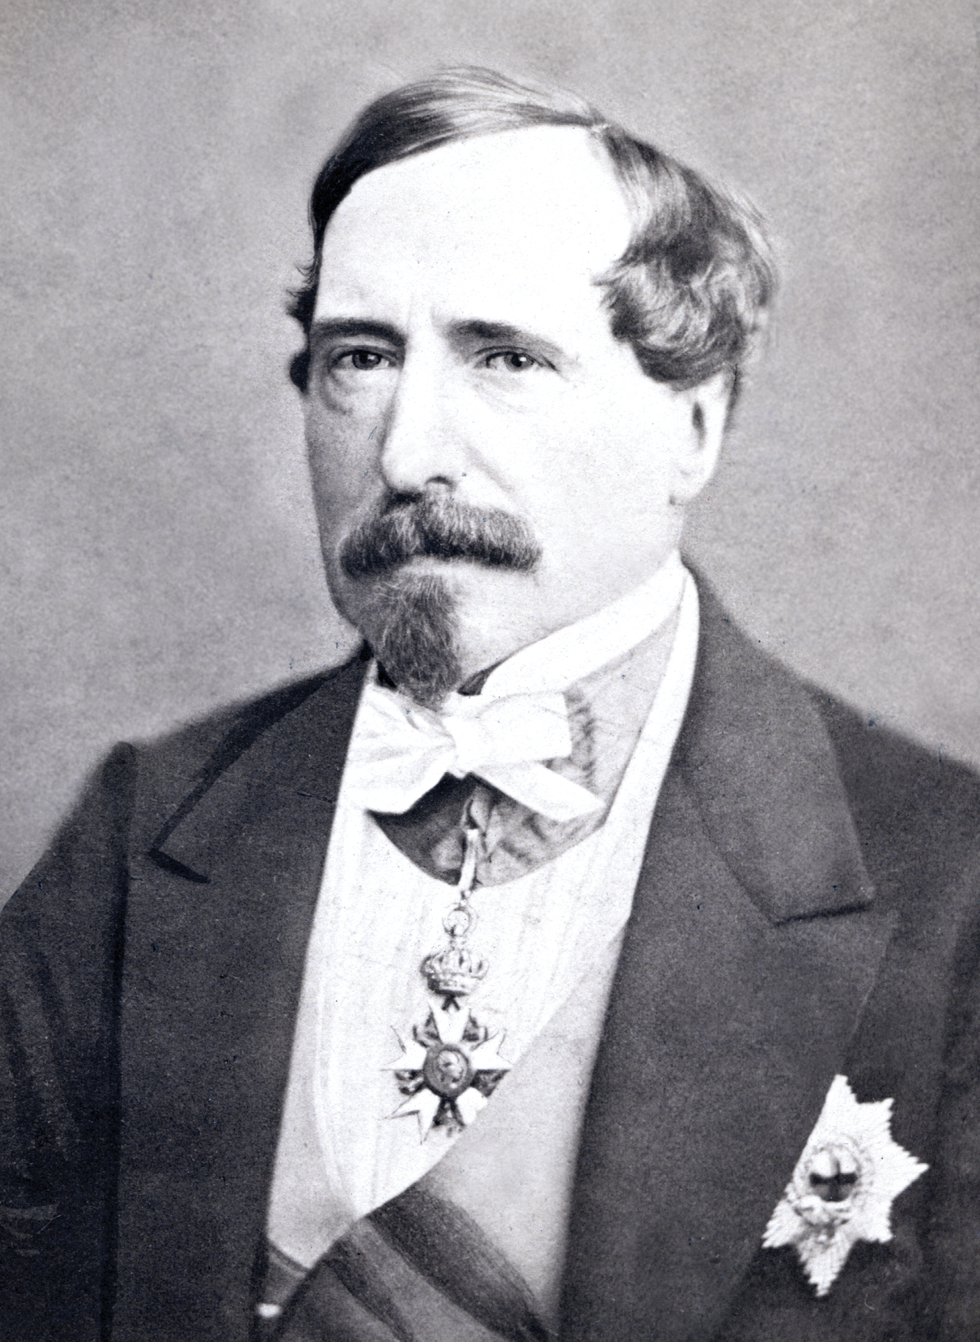 An image of the 4th Marquess of Hertford